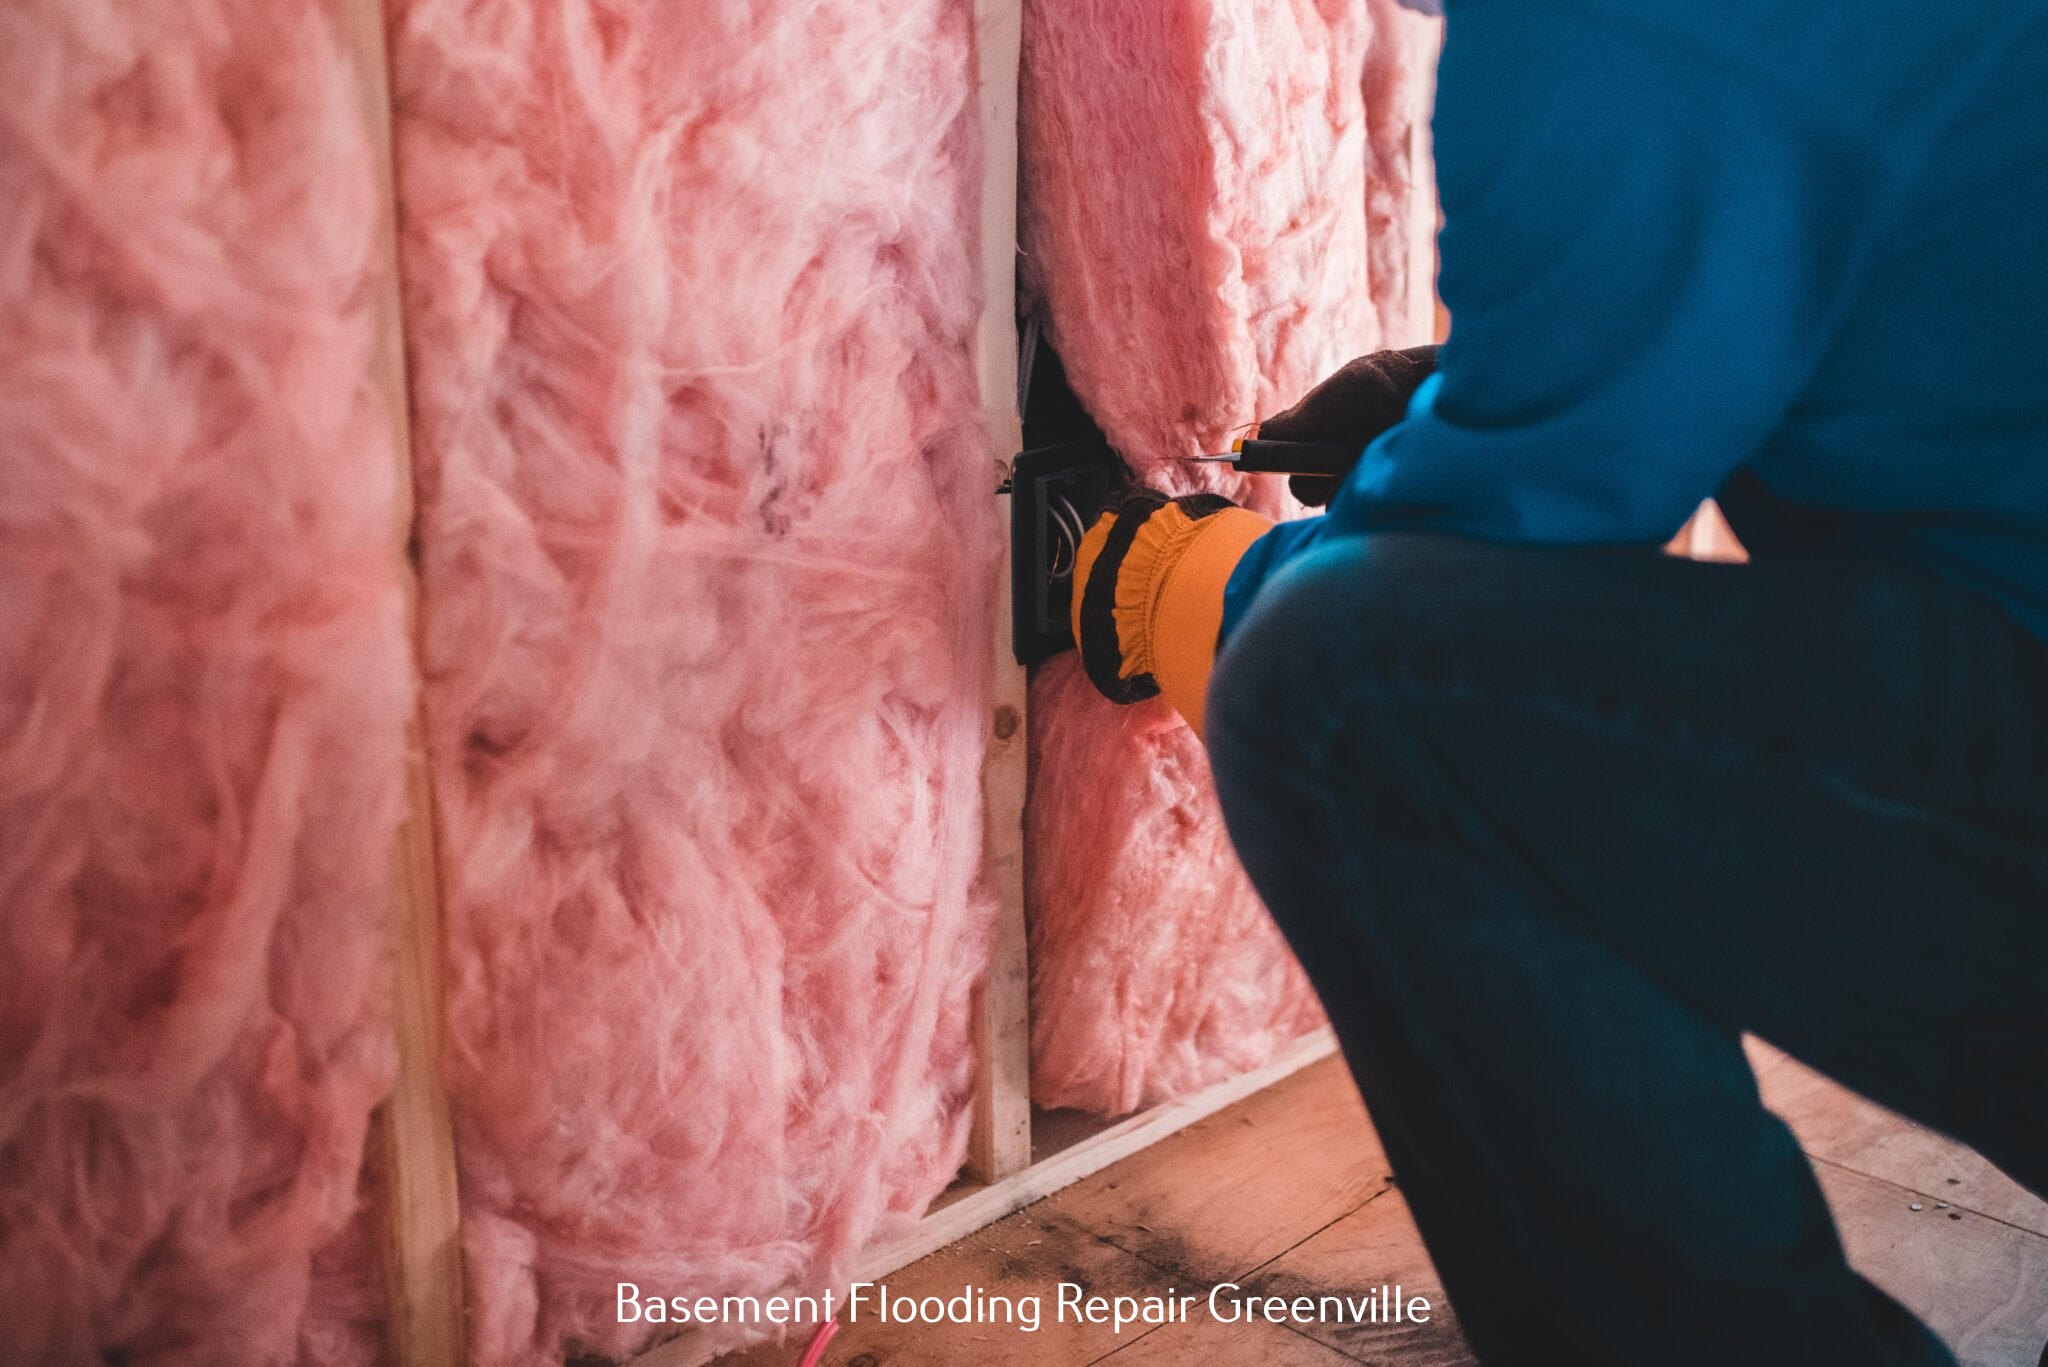 Crawl Space Ninja Greenville Explains the Dangers of a Damp Basement and How Waterproofing Can Help